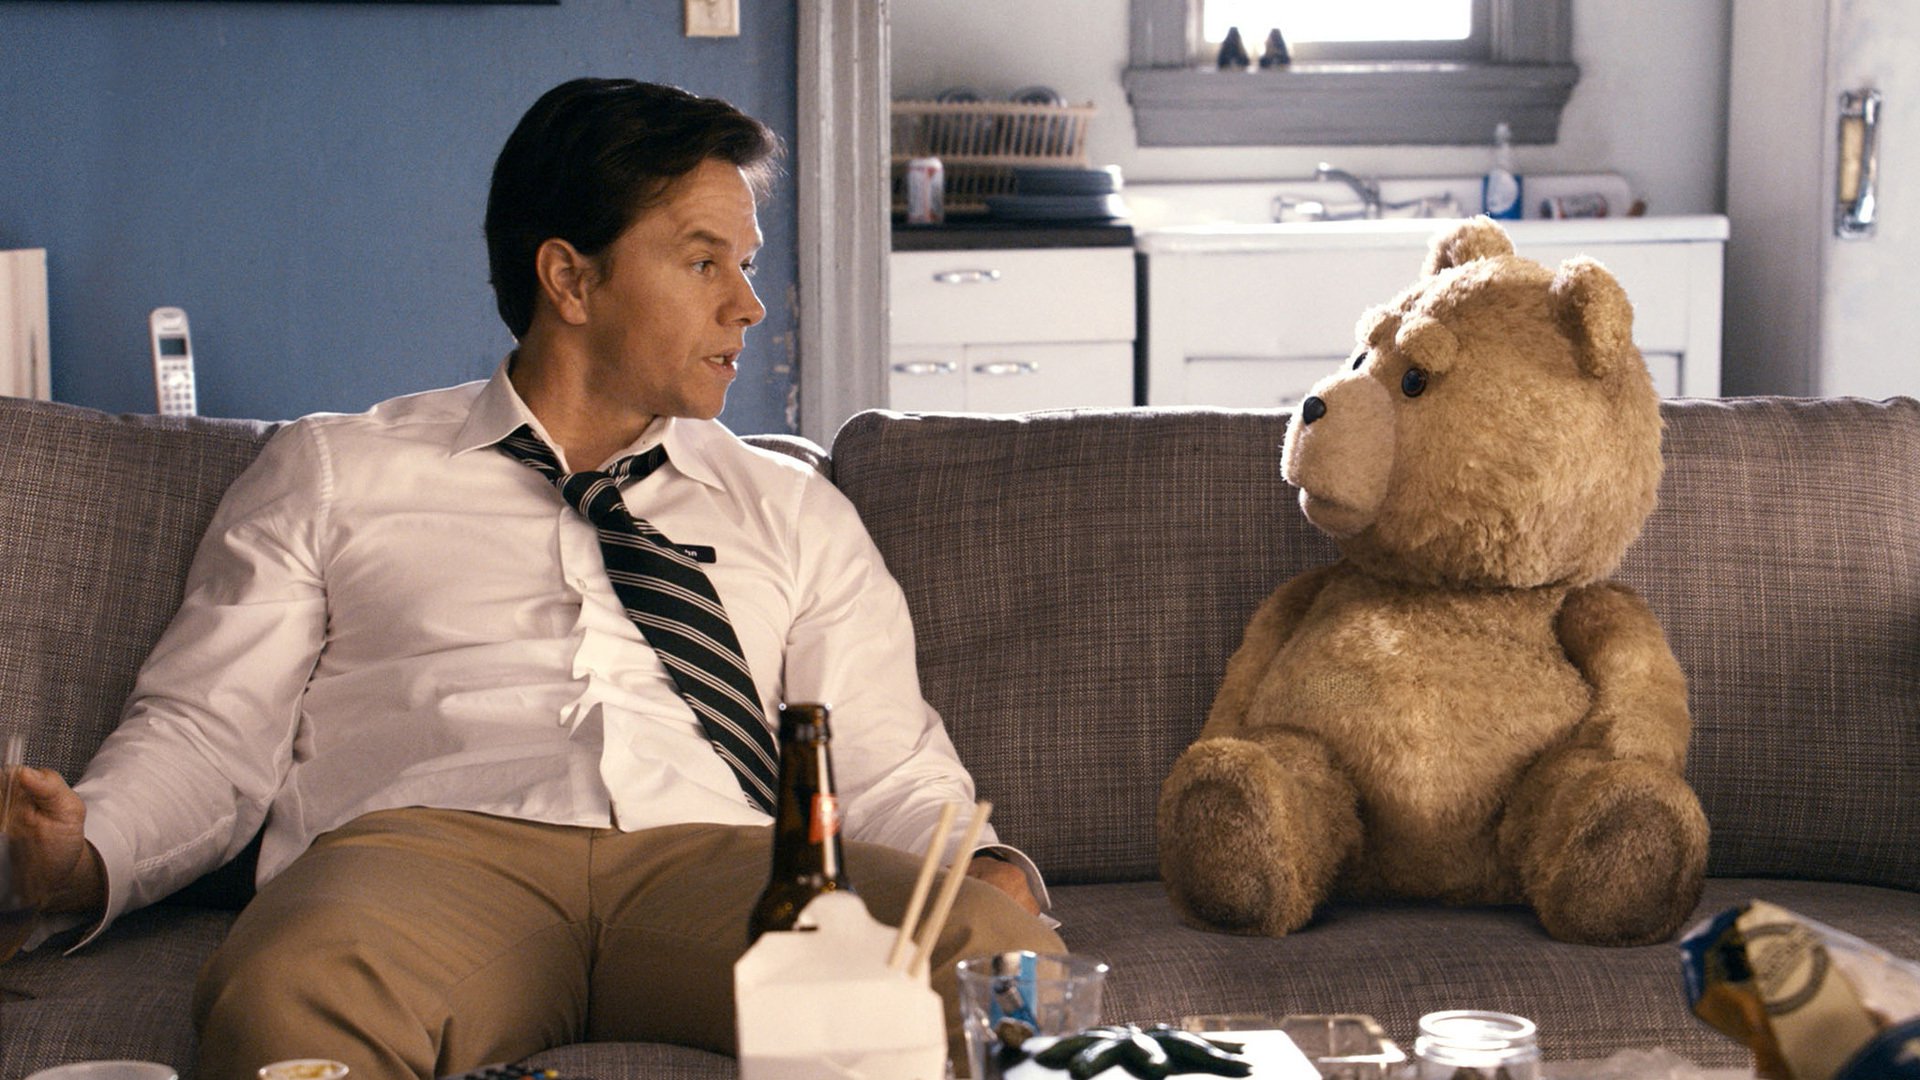 movie, ted, mark wahlberg, ted (movie character)